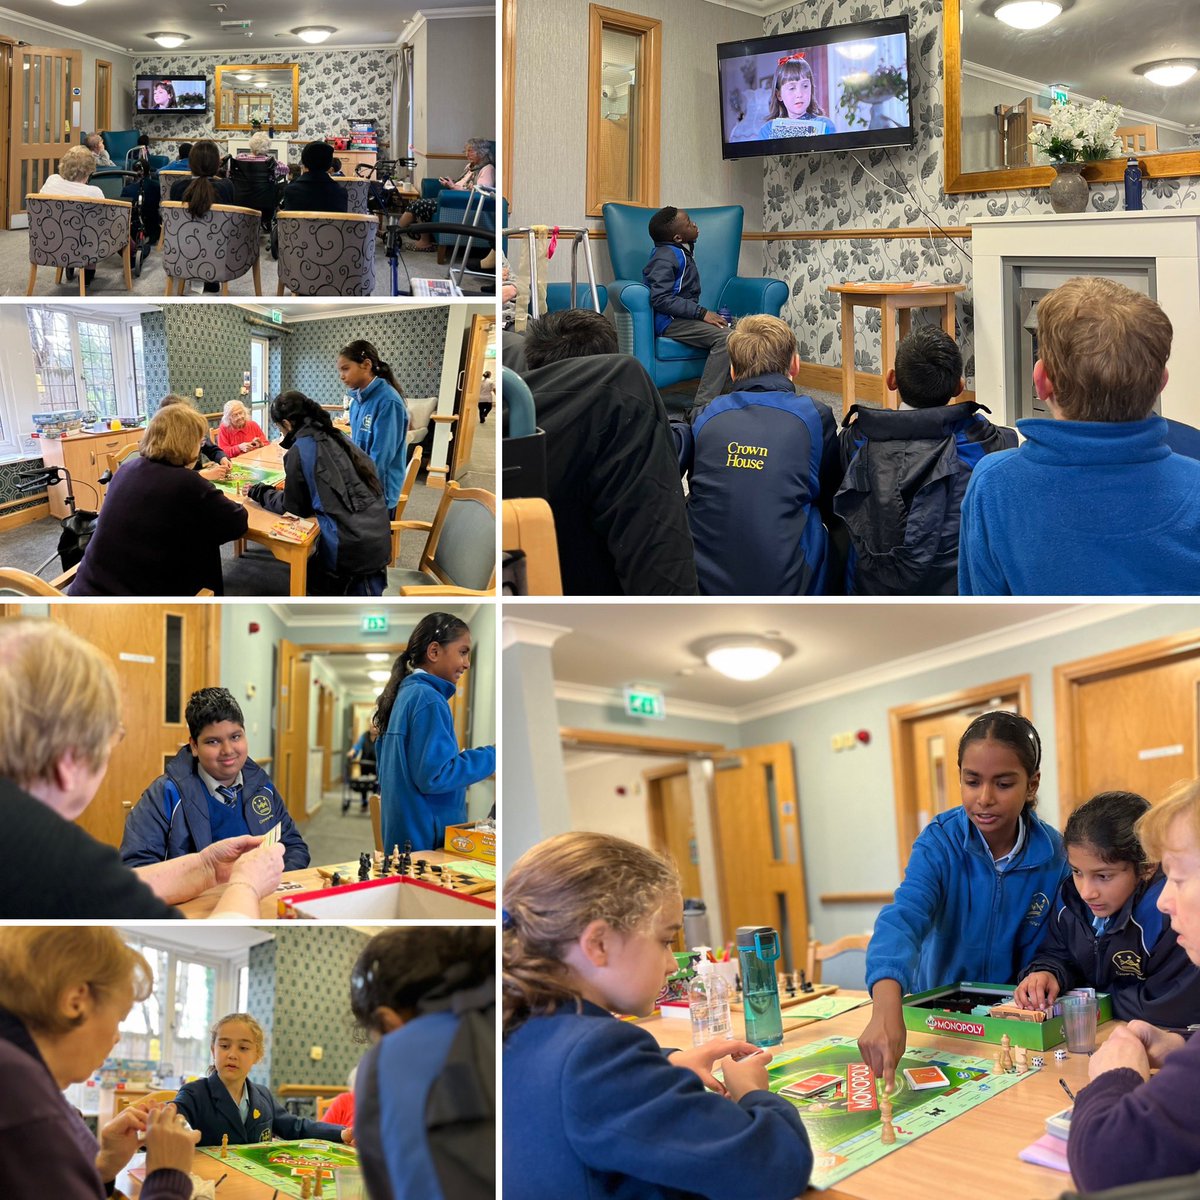 Preparing Year 6 for the transition to secondary school with community outreach at the local residential home today. 
This great opportunity promotes:
🩵 Empathy
🫶 Compassion
👥 Important social skills
#CrownHouse #PrepSchoolLife #Year6 #PrepSchoolHighWycombe #CommunityOutreach